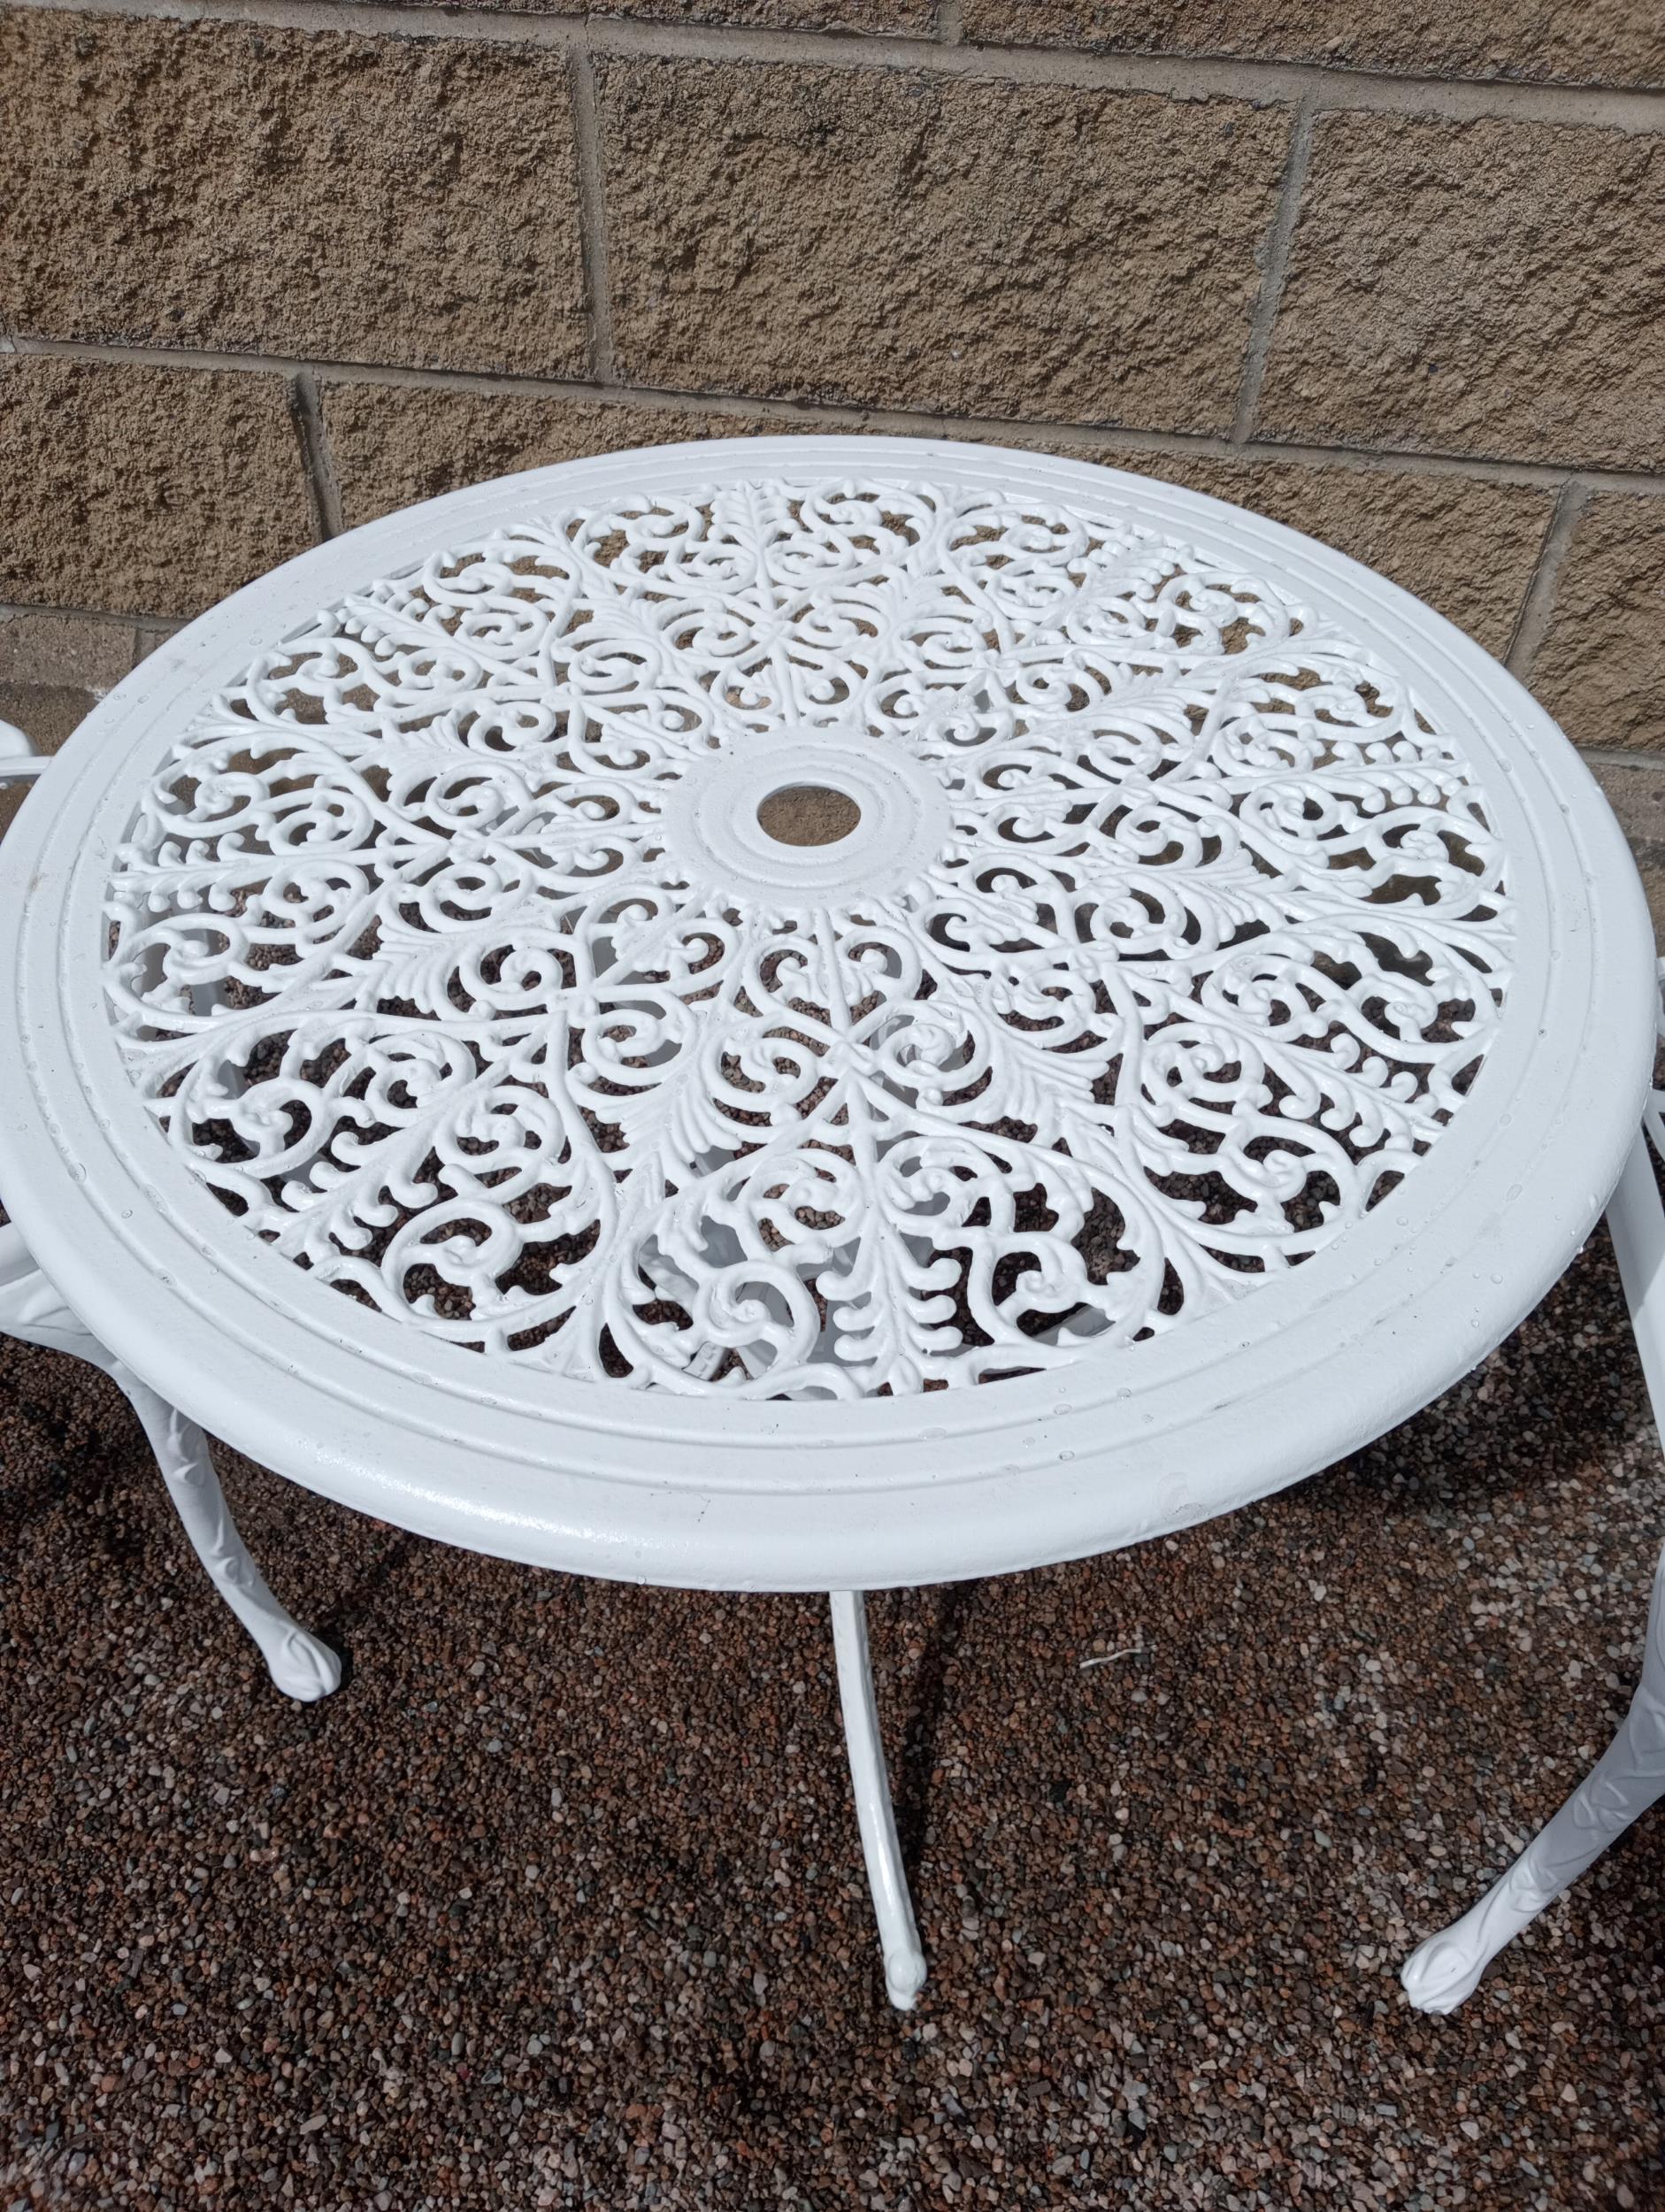 Aluminium garden table and two armchairs {Table H 60cm x Dia 70cm Chairs H 90cm x W 54cm x D 44cm }. - Image 2 of 4